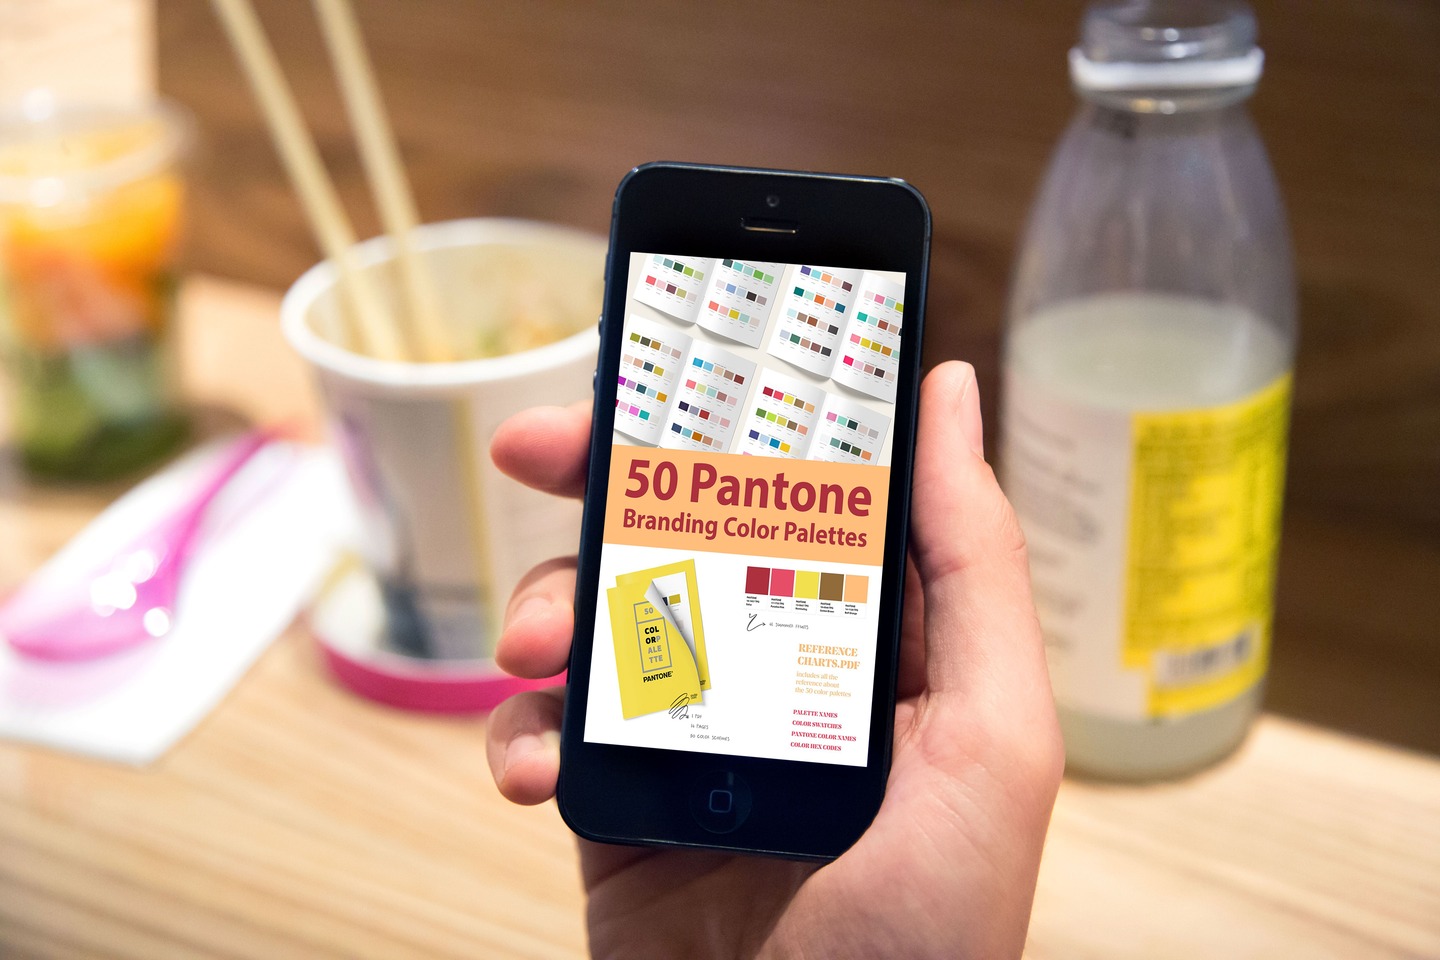 50 Pantone Branding Color Palettes On The Phone.